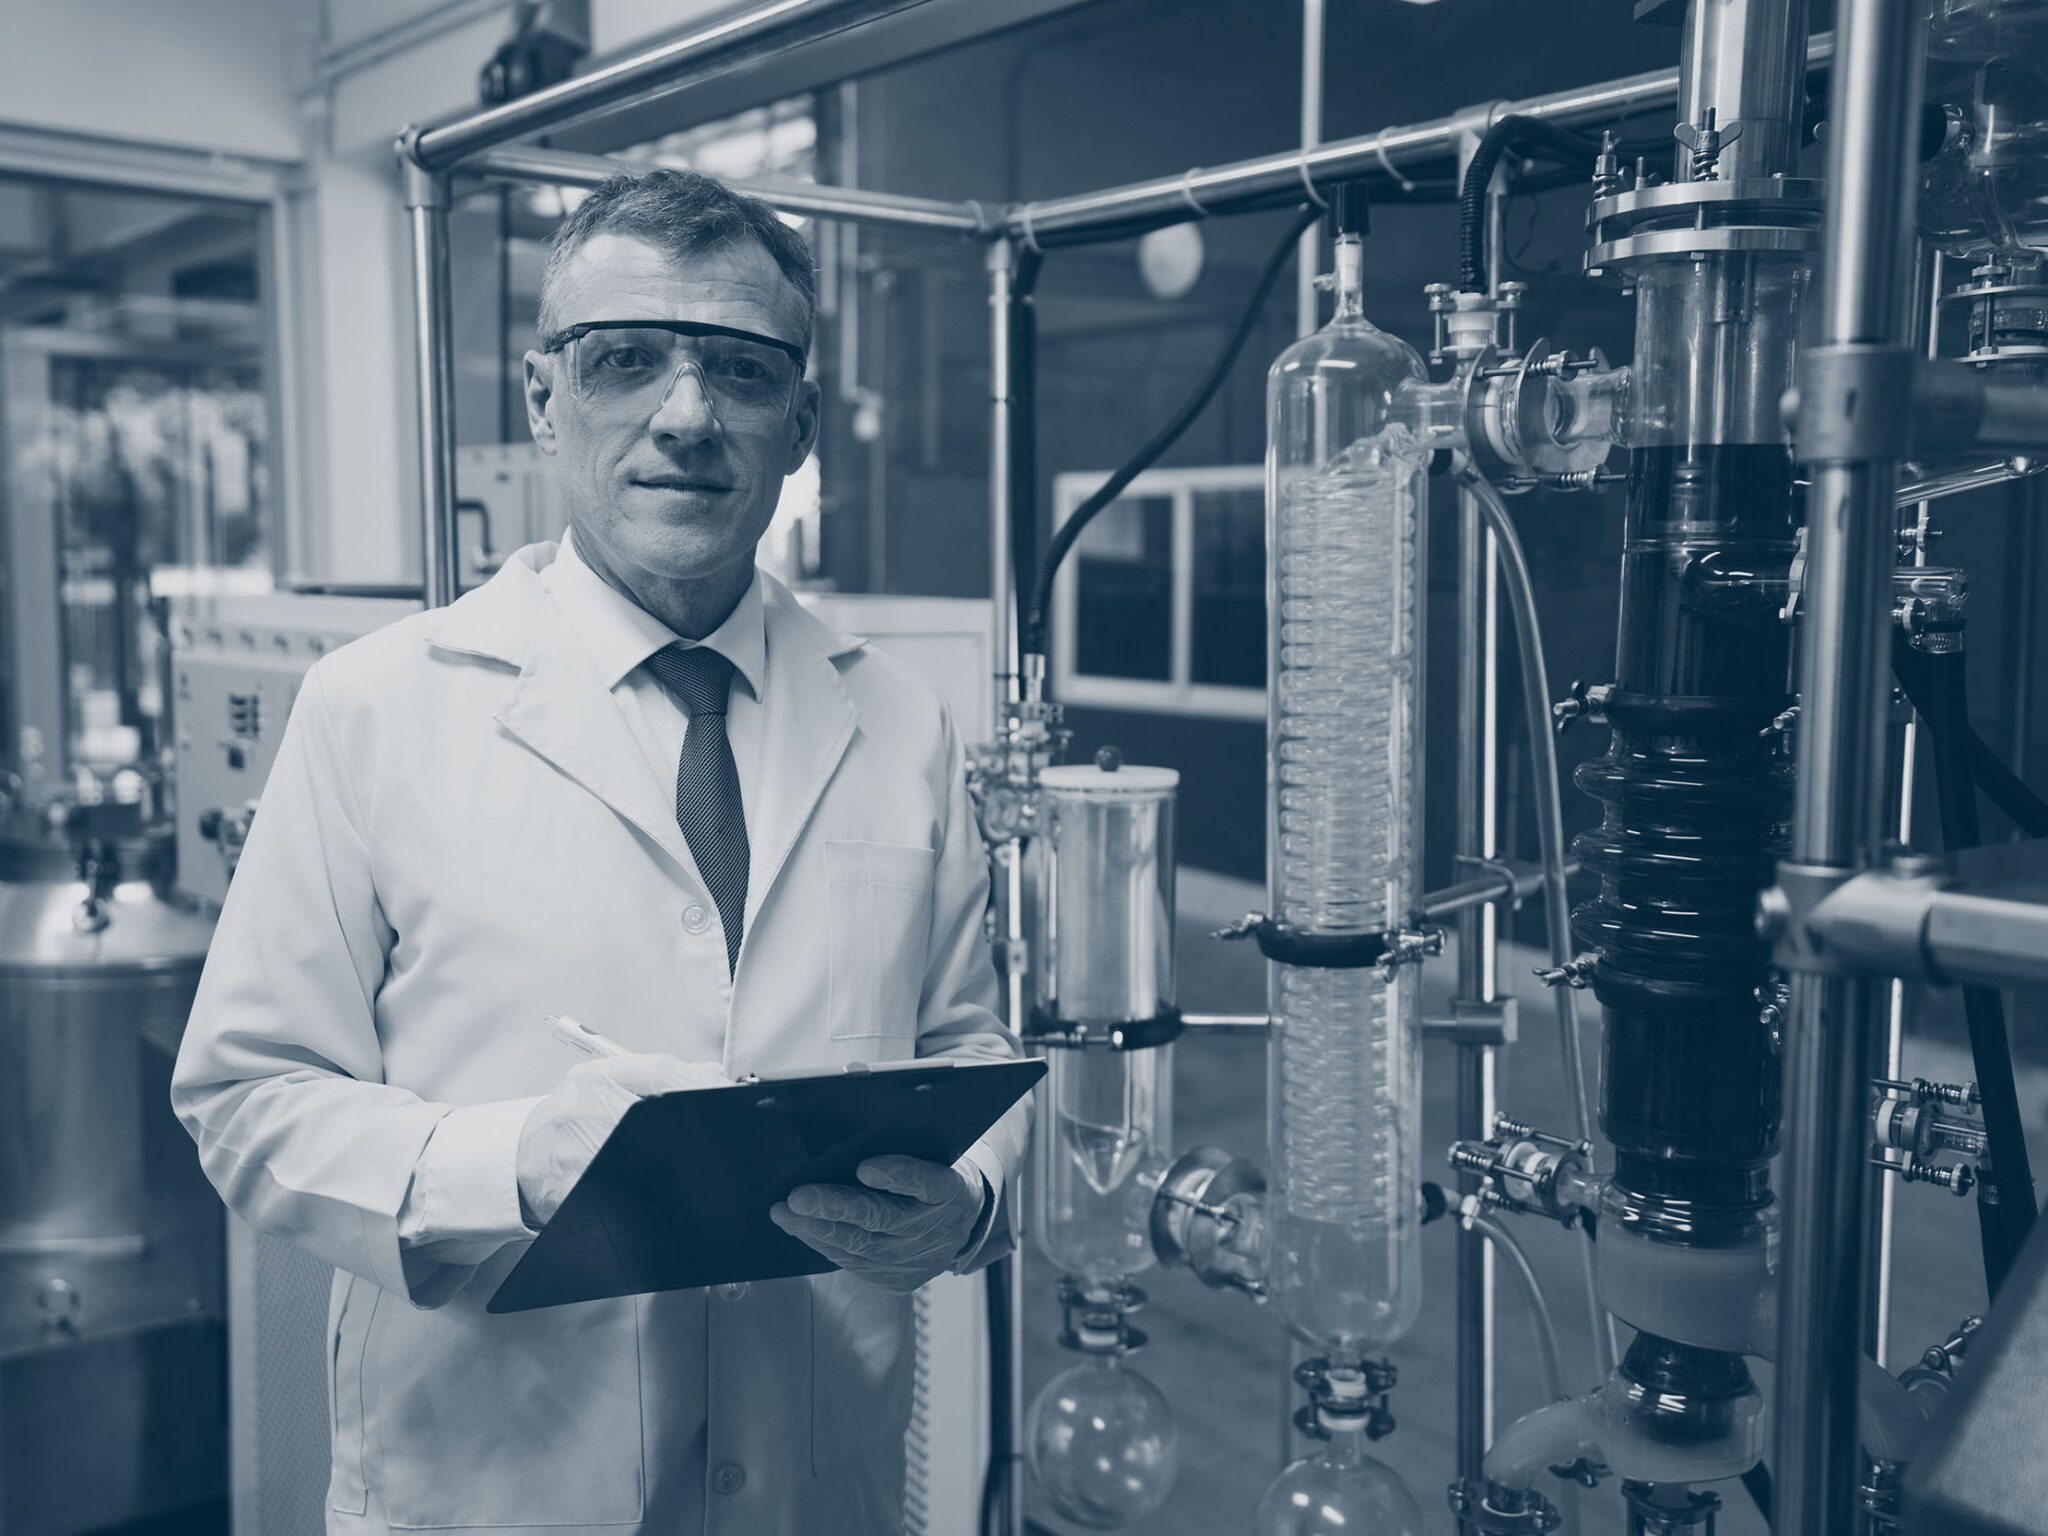 Portrait of Caucasian expert cannabis researcher in lab uniform checking rotational vaporizer machine in process of CBD oil extraction. Shot of male scientist looking at camera with confident face.